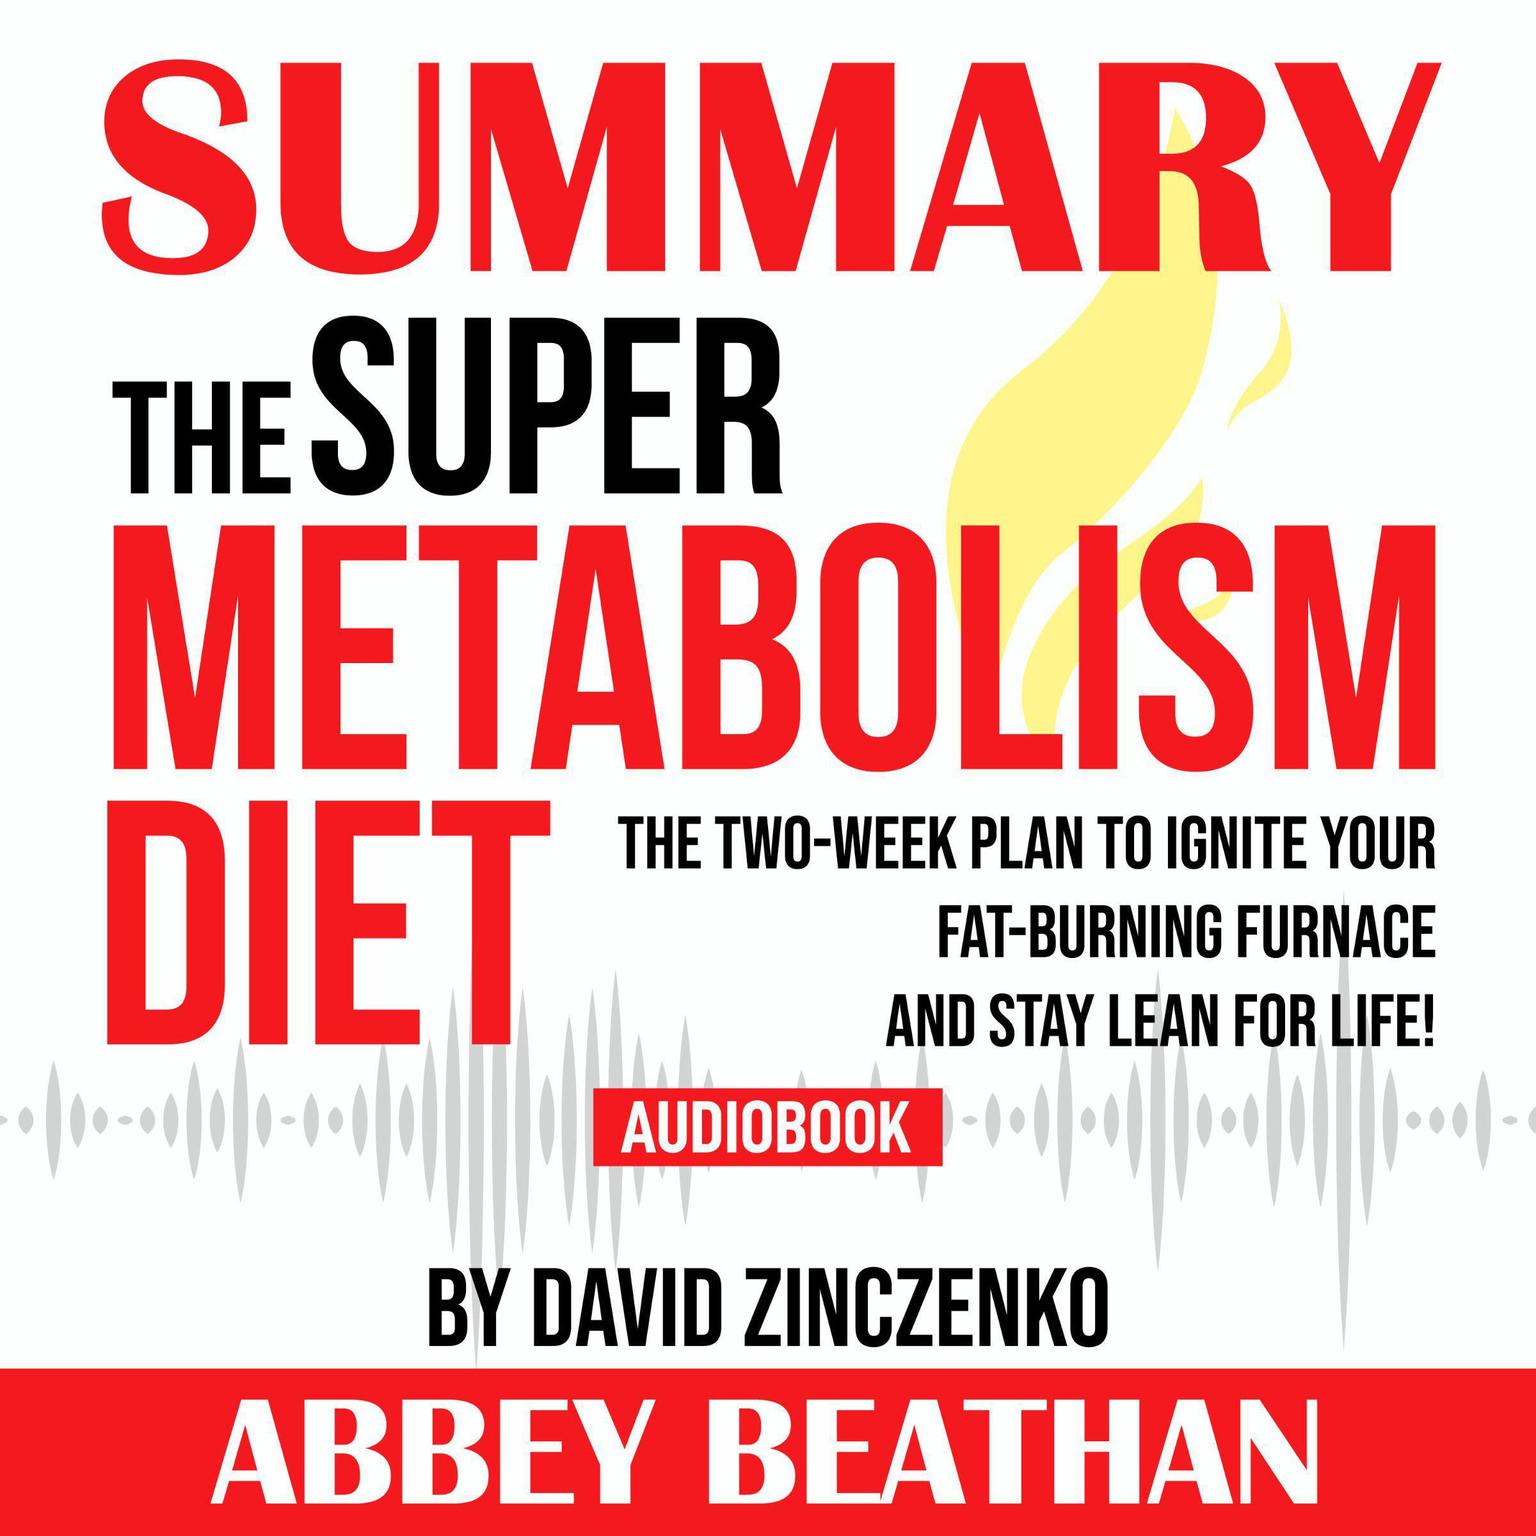 Summary of The Super Metabolism Diet: The Two-Week Plan to Ignite Your Fat-Burning Furnace and Stay Lean for Life! by David Zinczenko Audiobook, by Abbey Beathan